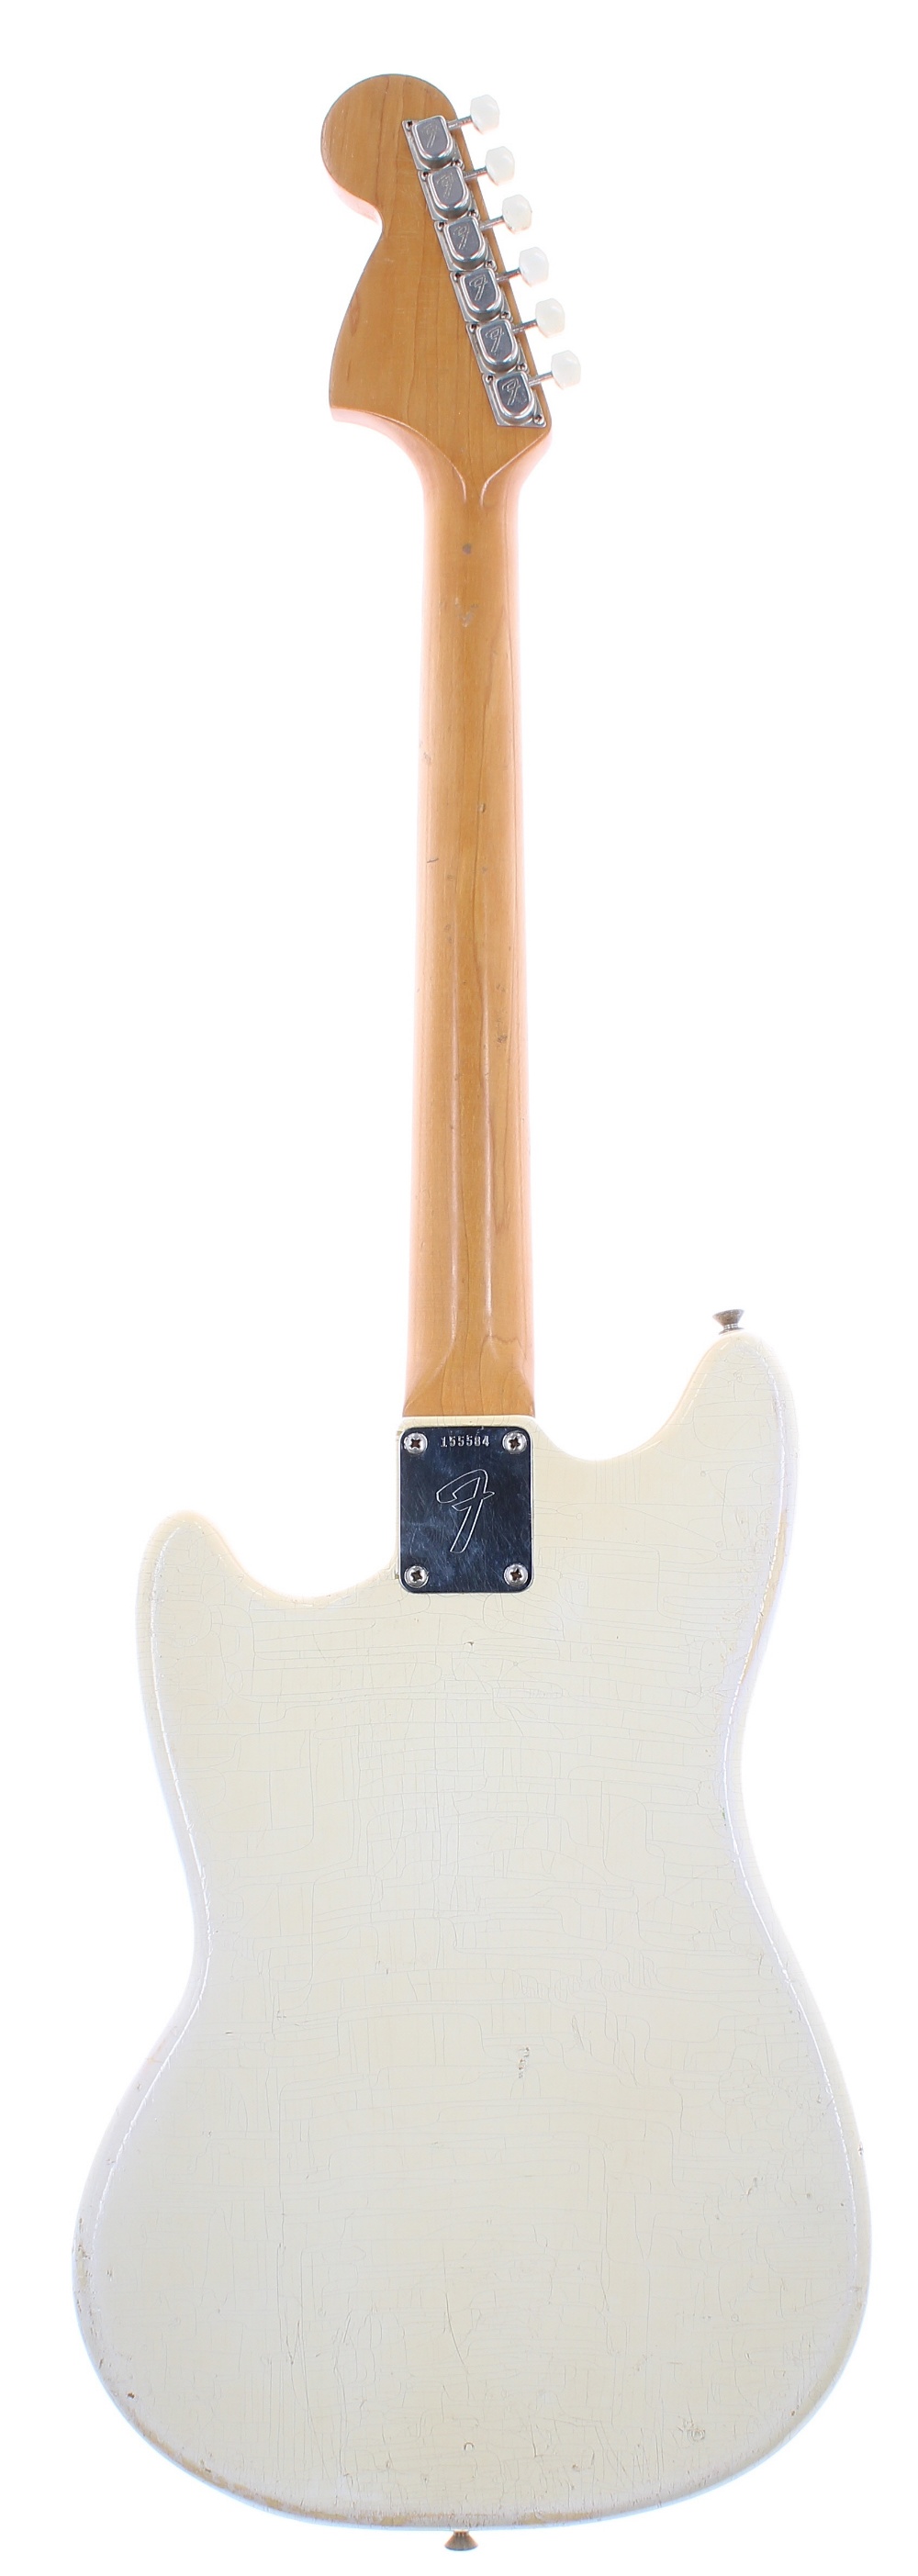 1966 Fender Mustang electric guitar, made in USA, ser. no. 1xxxx4; Finish: Olympic white, heavy - Image 2 of 10